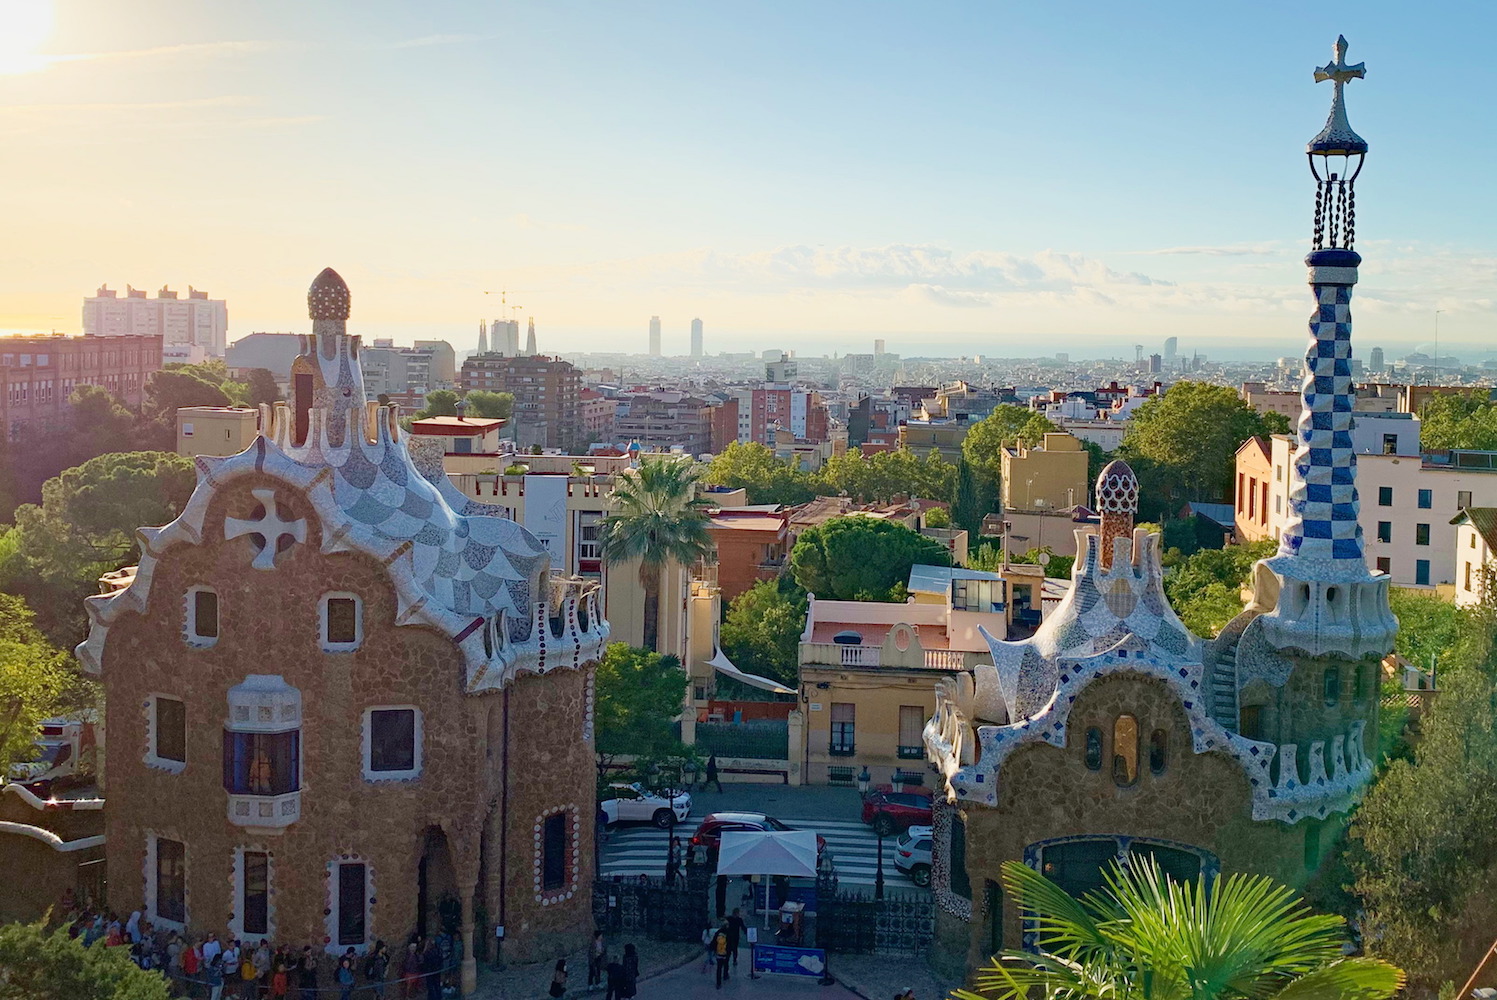 How to Spend One Day in Barcelona